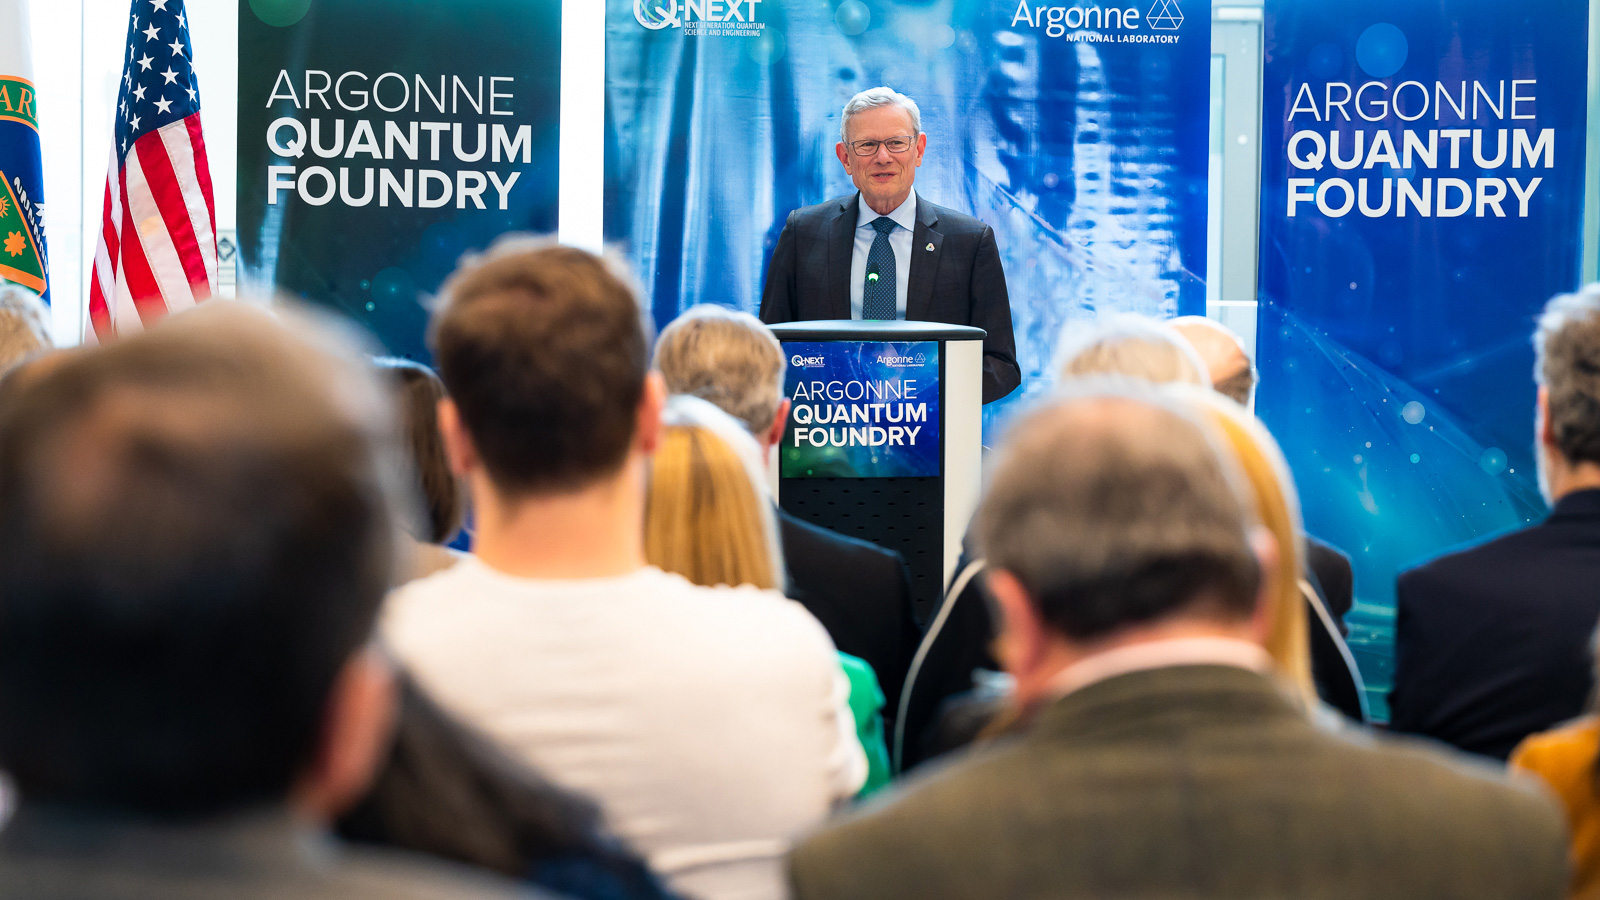 Argonne Director Paul Kearns welcomes guests to the Argonne Quantum Foundry ribbon cutting.